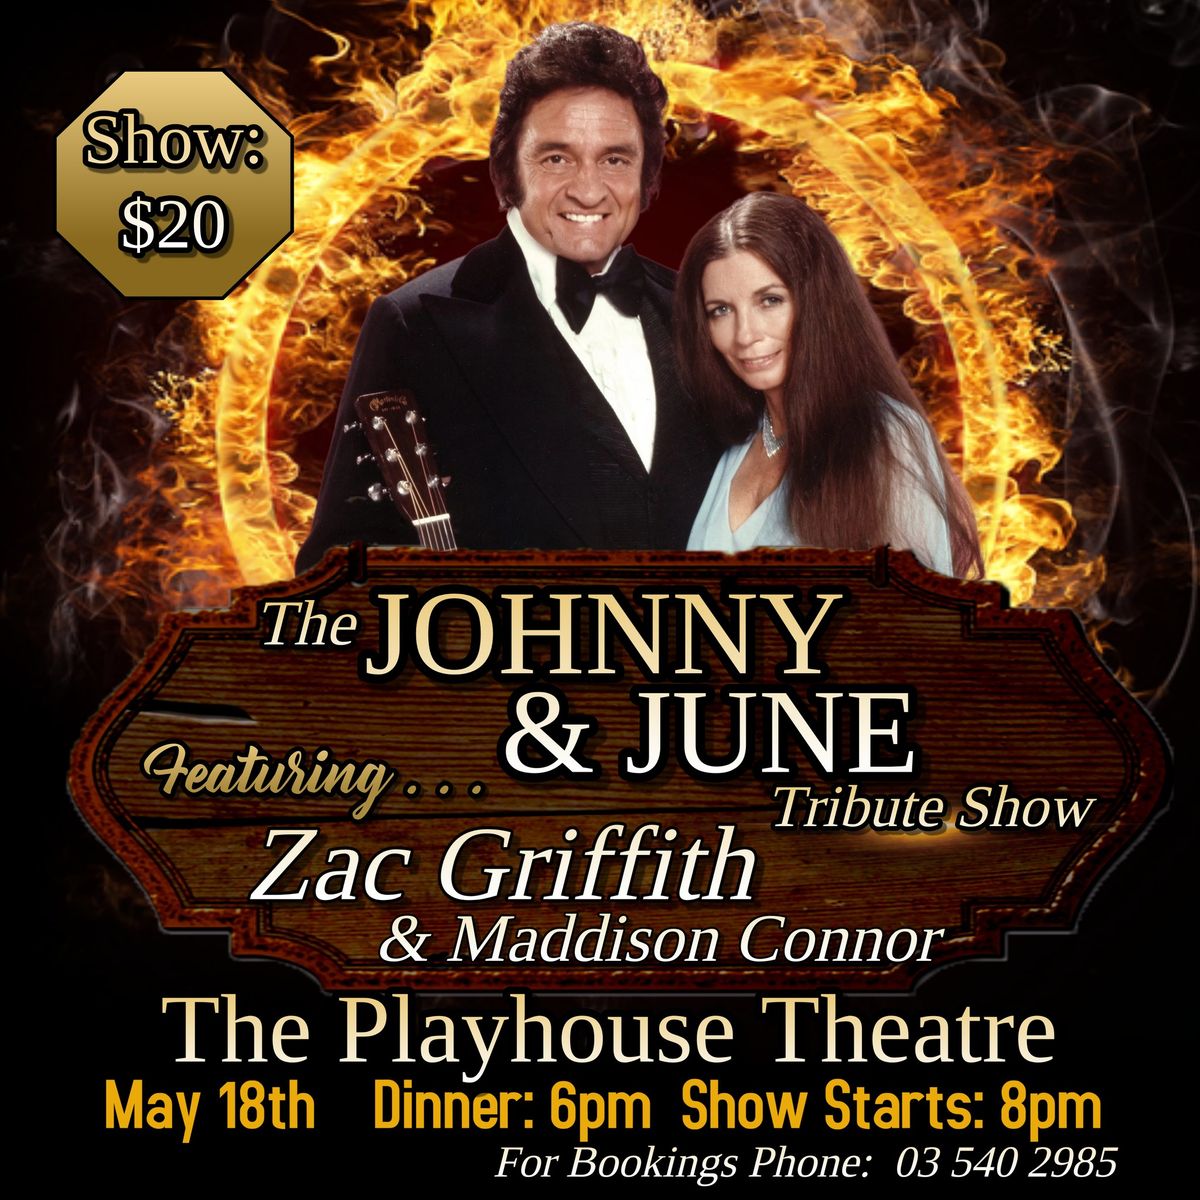 Johnny and June Tribute Show, presented by Zac Griffith & Maddison Connor SOLD OUT NEW SHOW ADDED